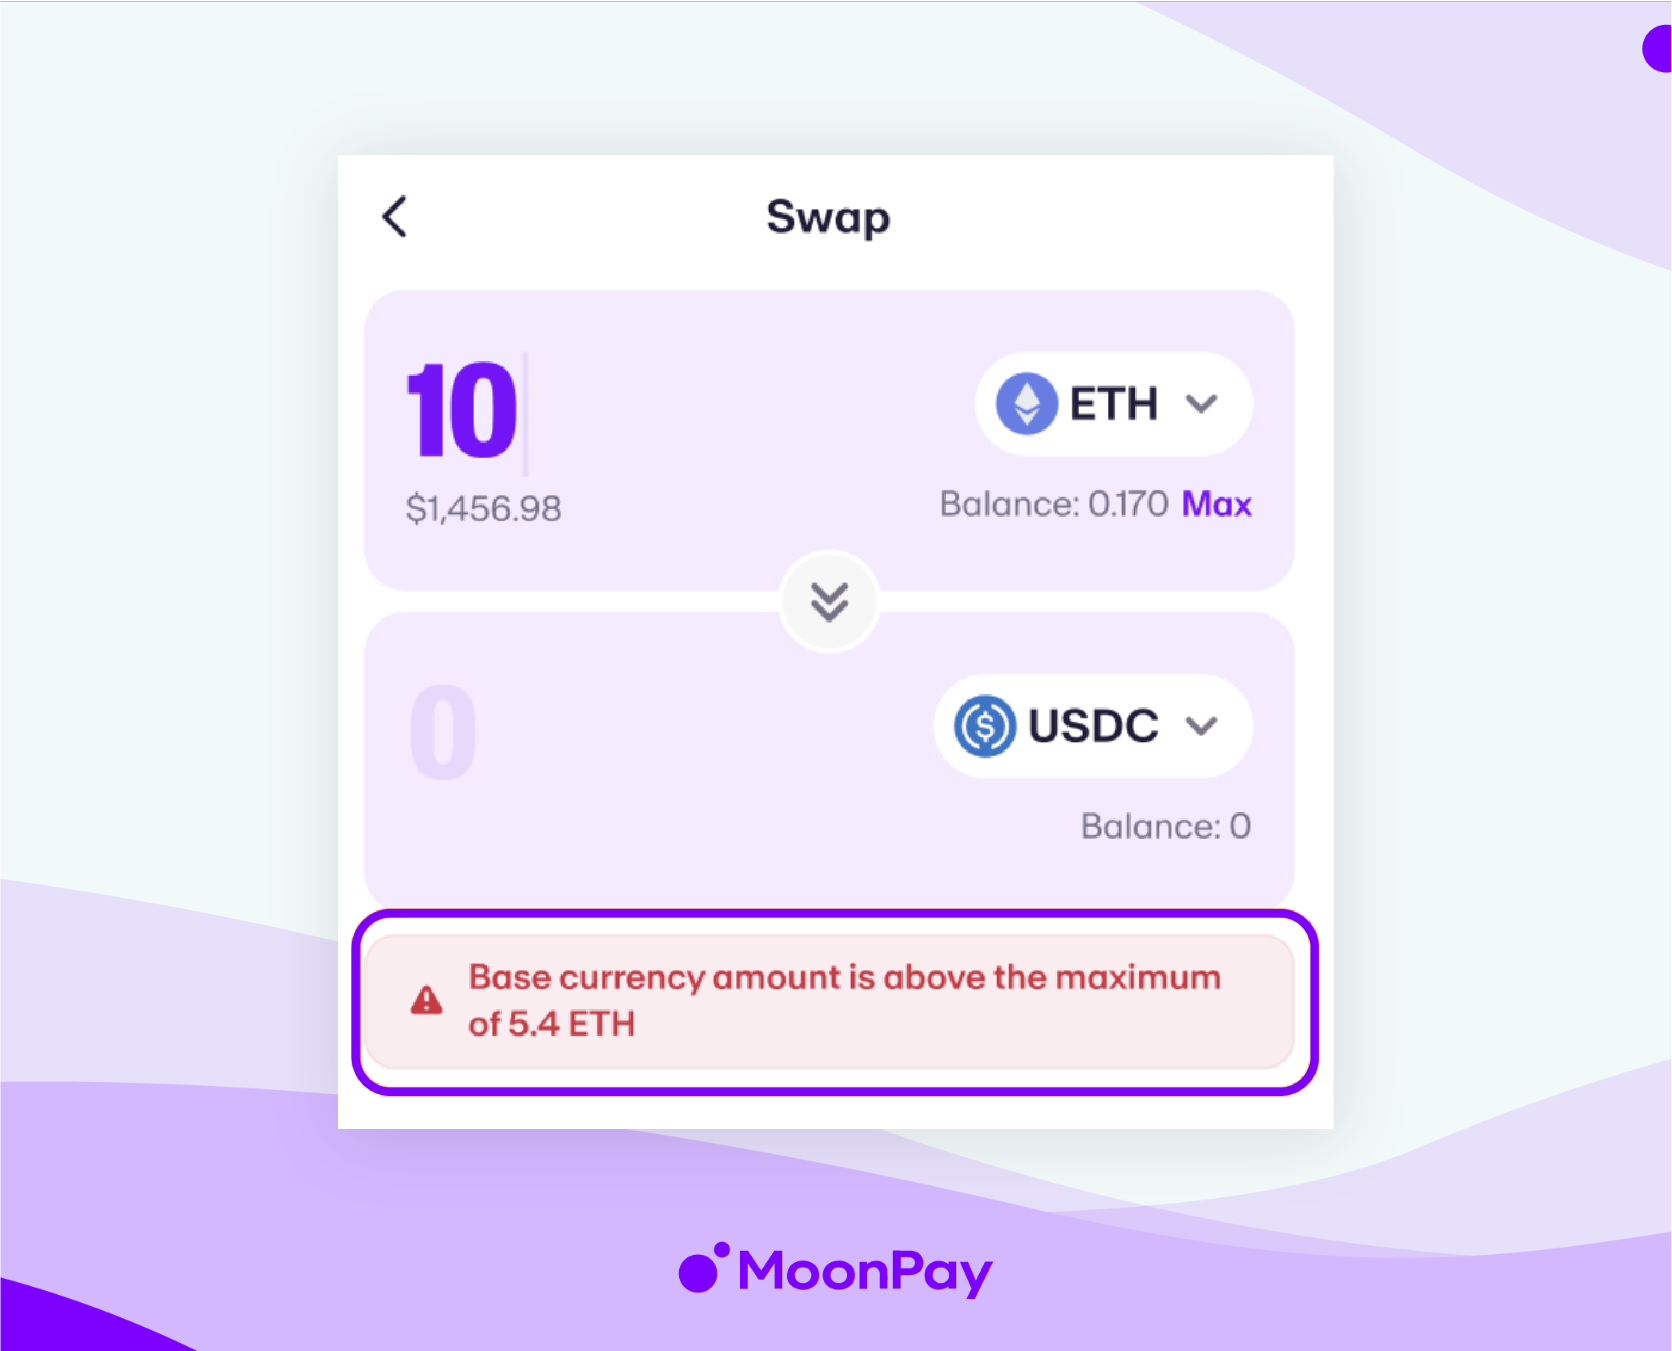 MoonPay app's window shows the amount inputted exceeds the maximum base currency.